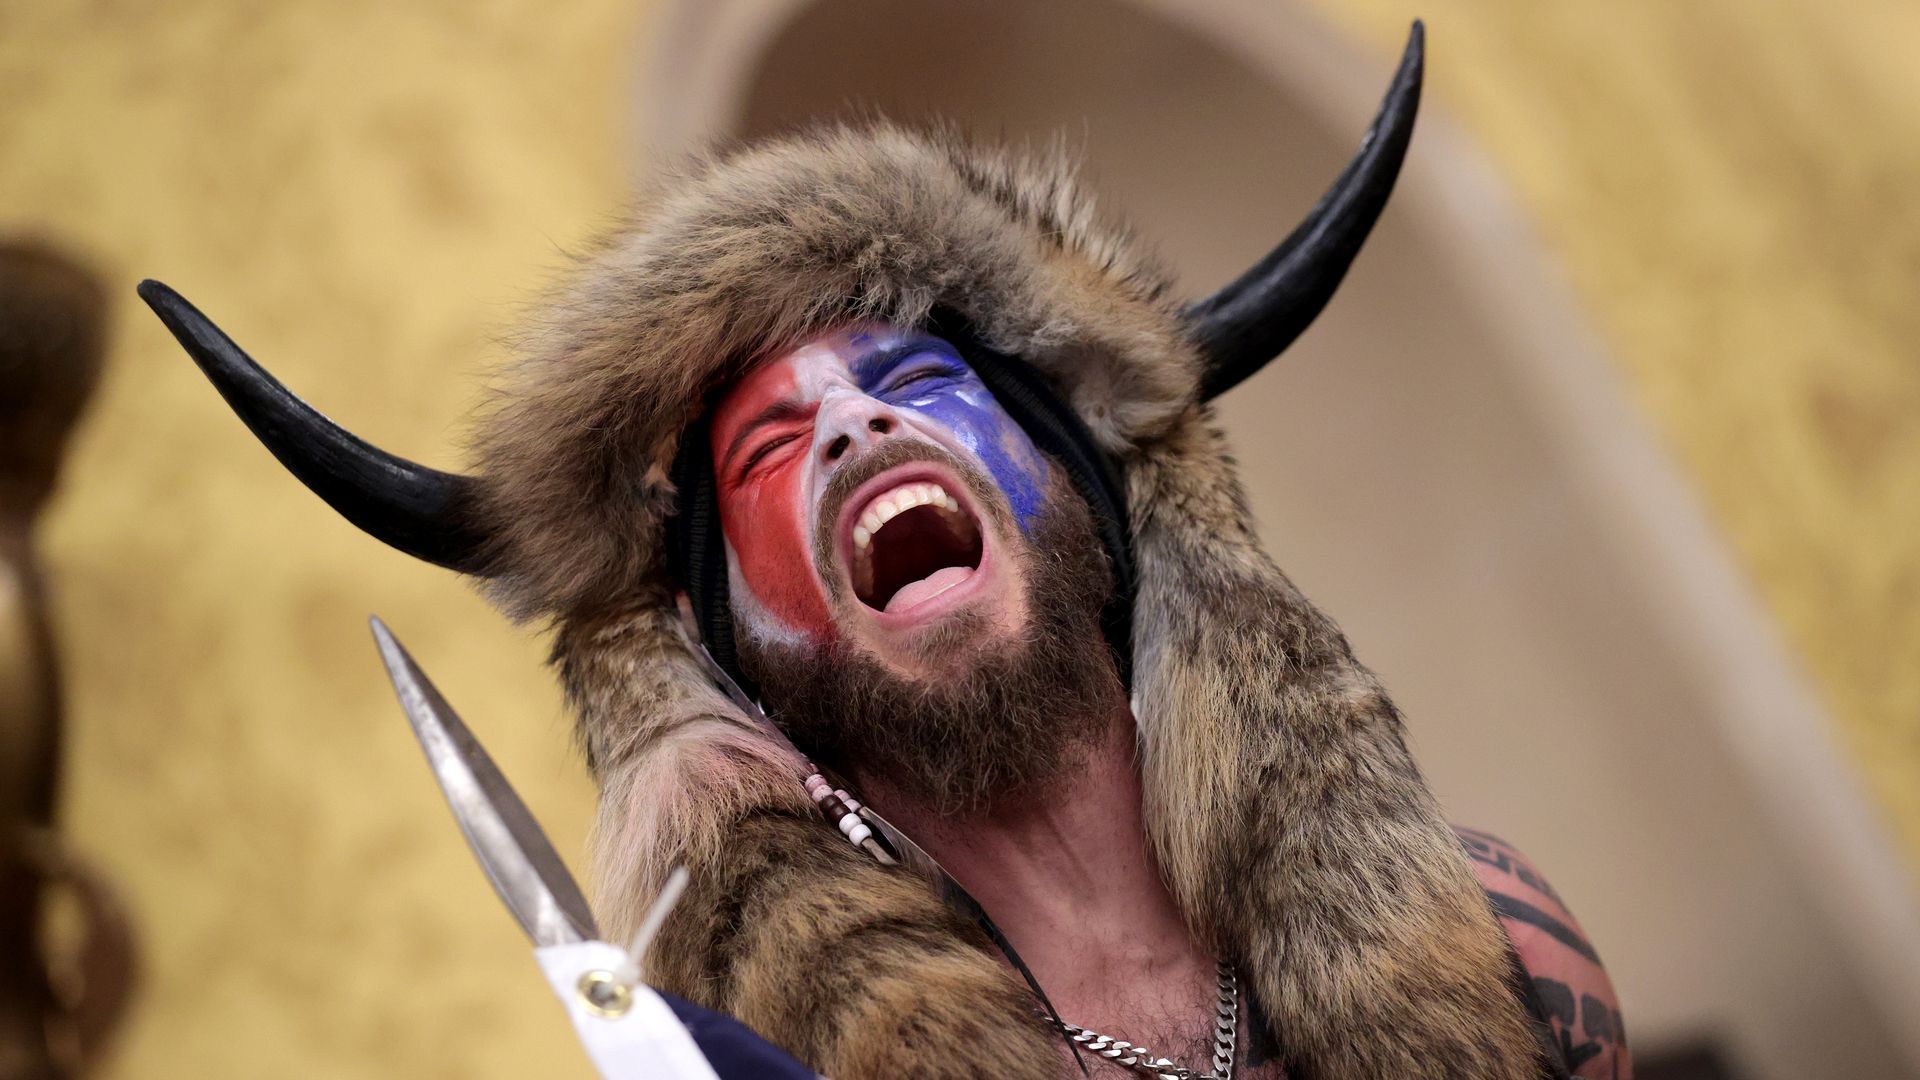 One of the rioters at the U.S. Capitol dressed in fur, some horns and with red, white and blue face paint.